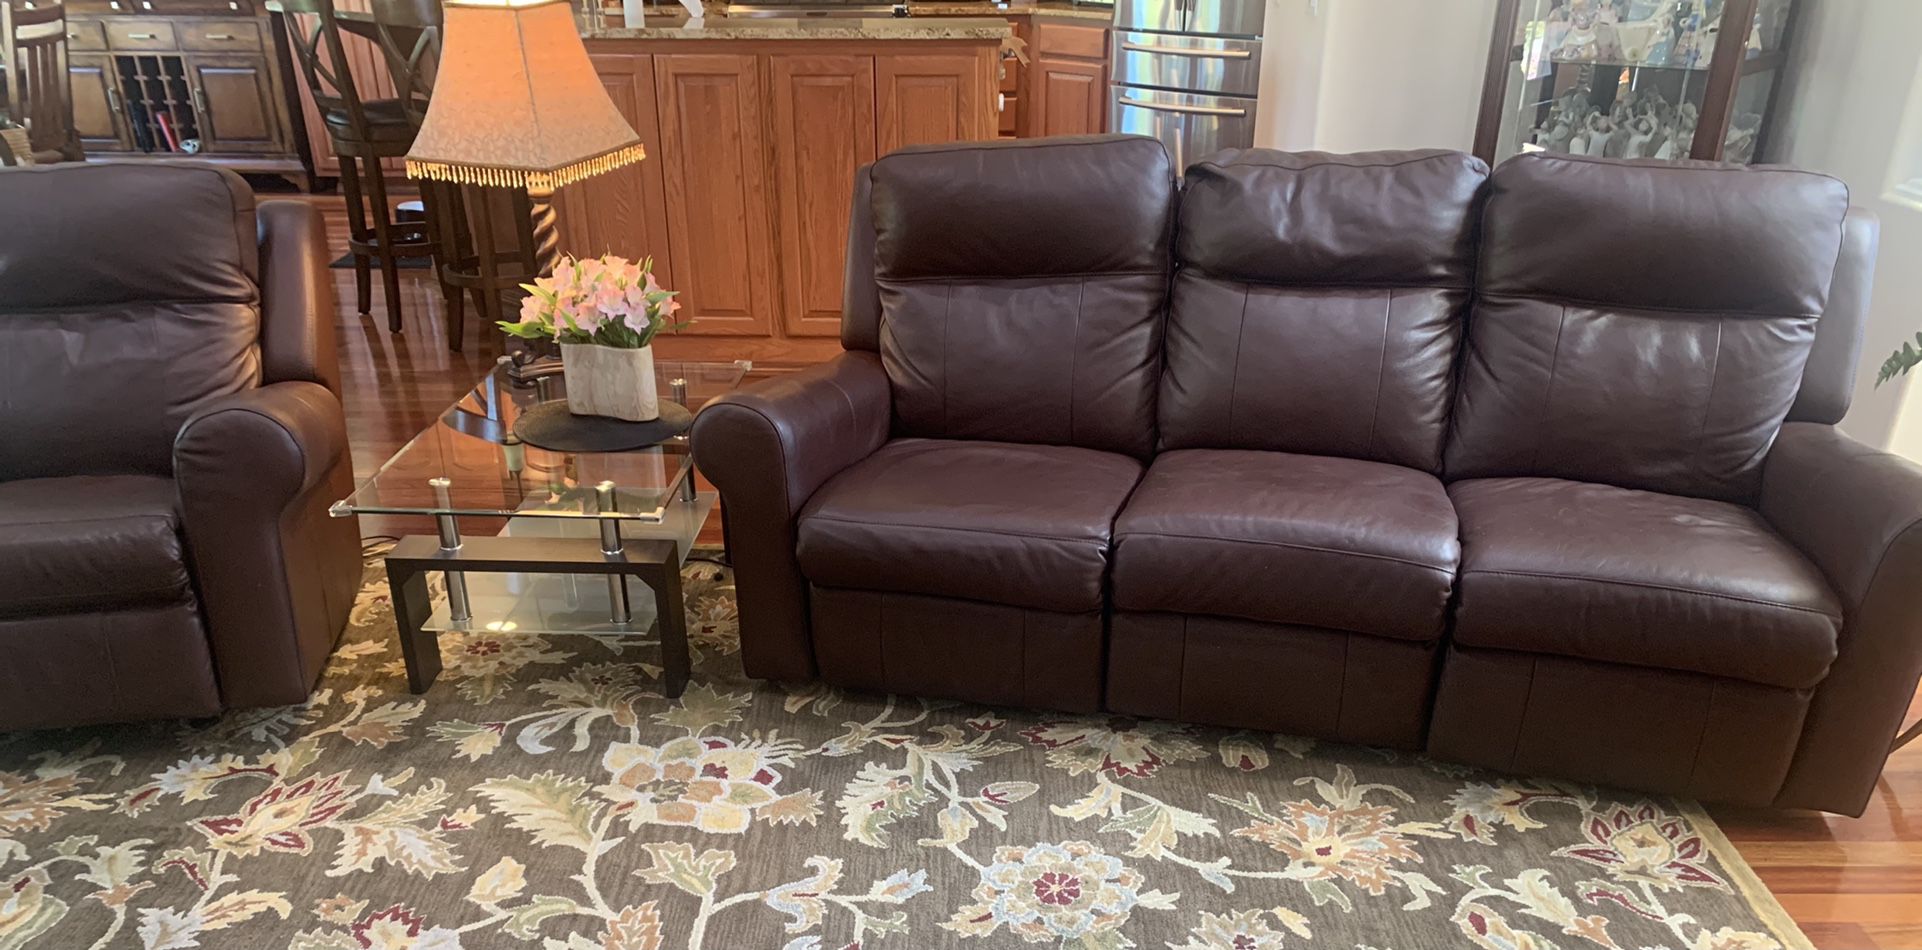 Sofa Is SOLD** 2 Recliners Avail. PRICE for Each